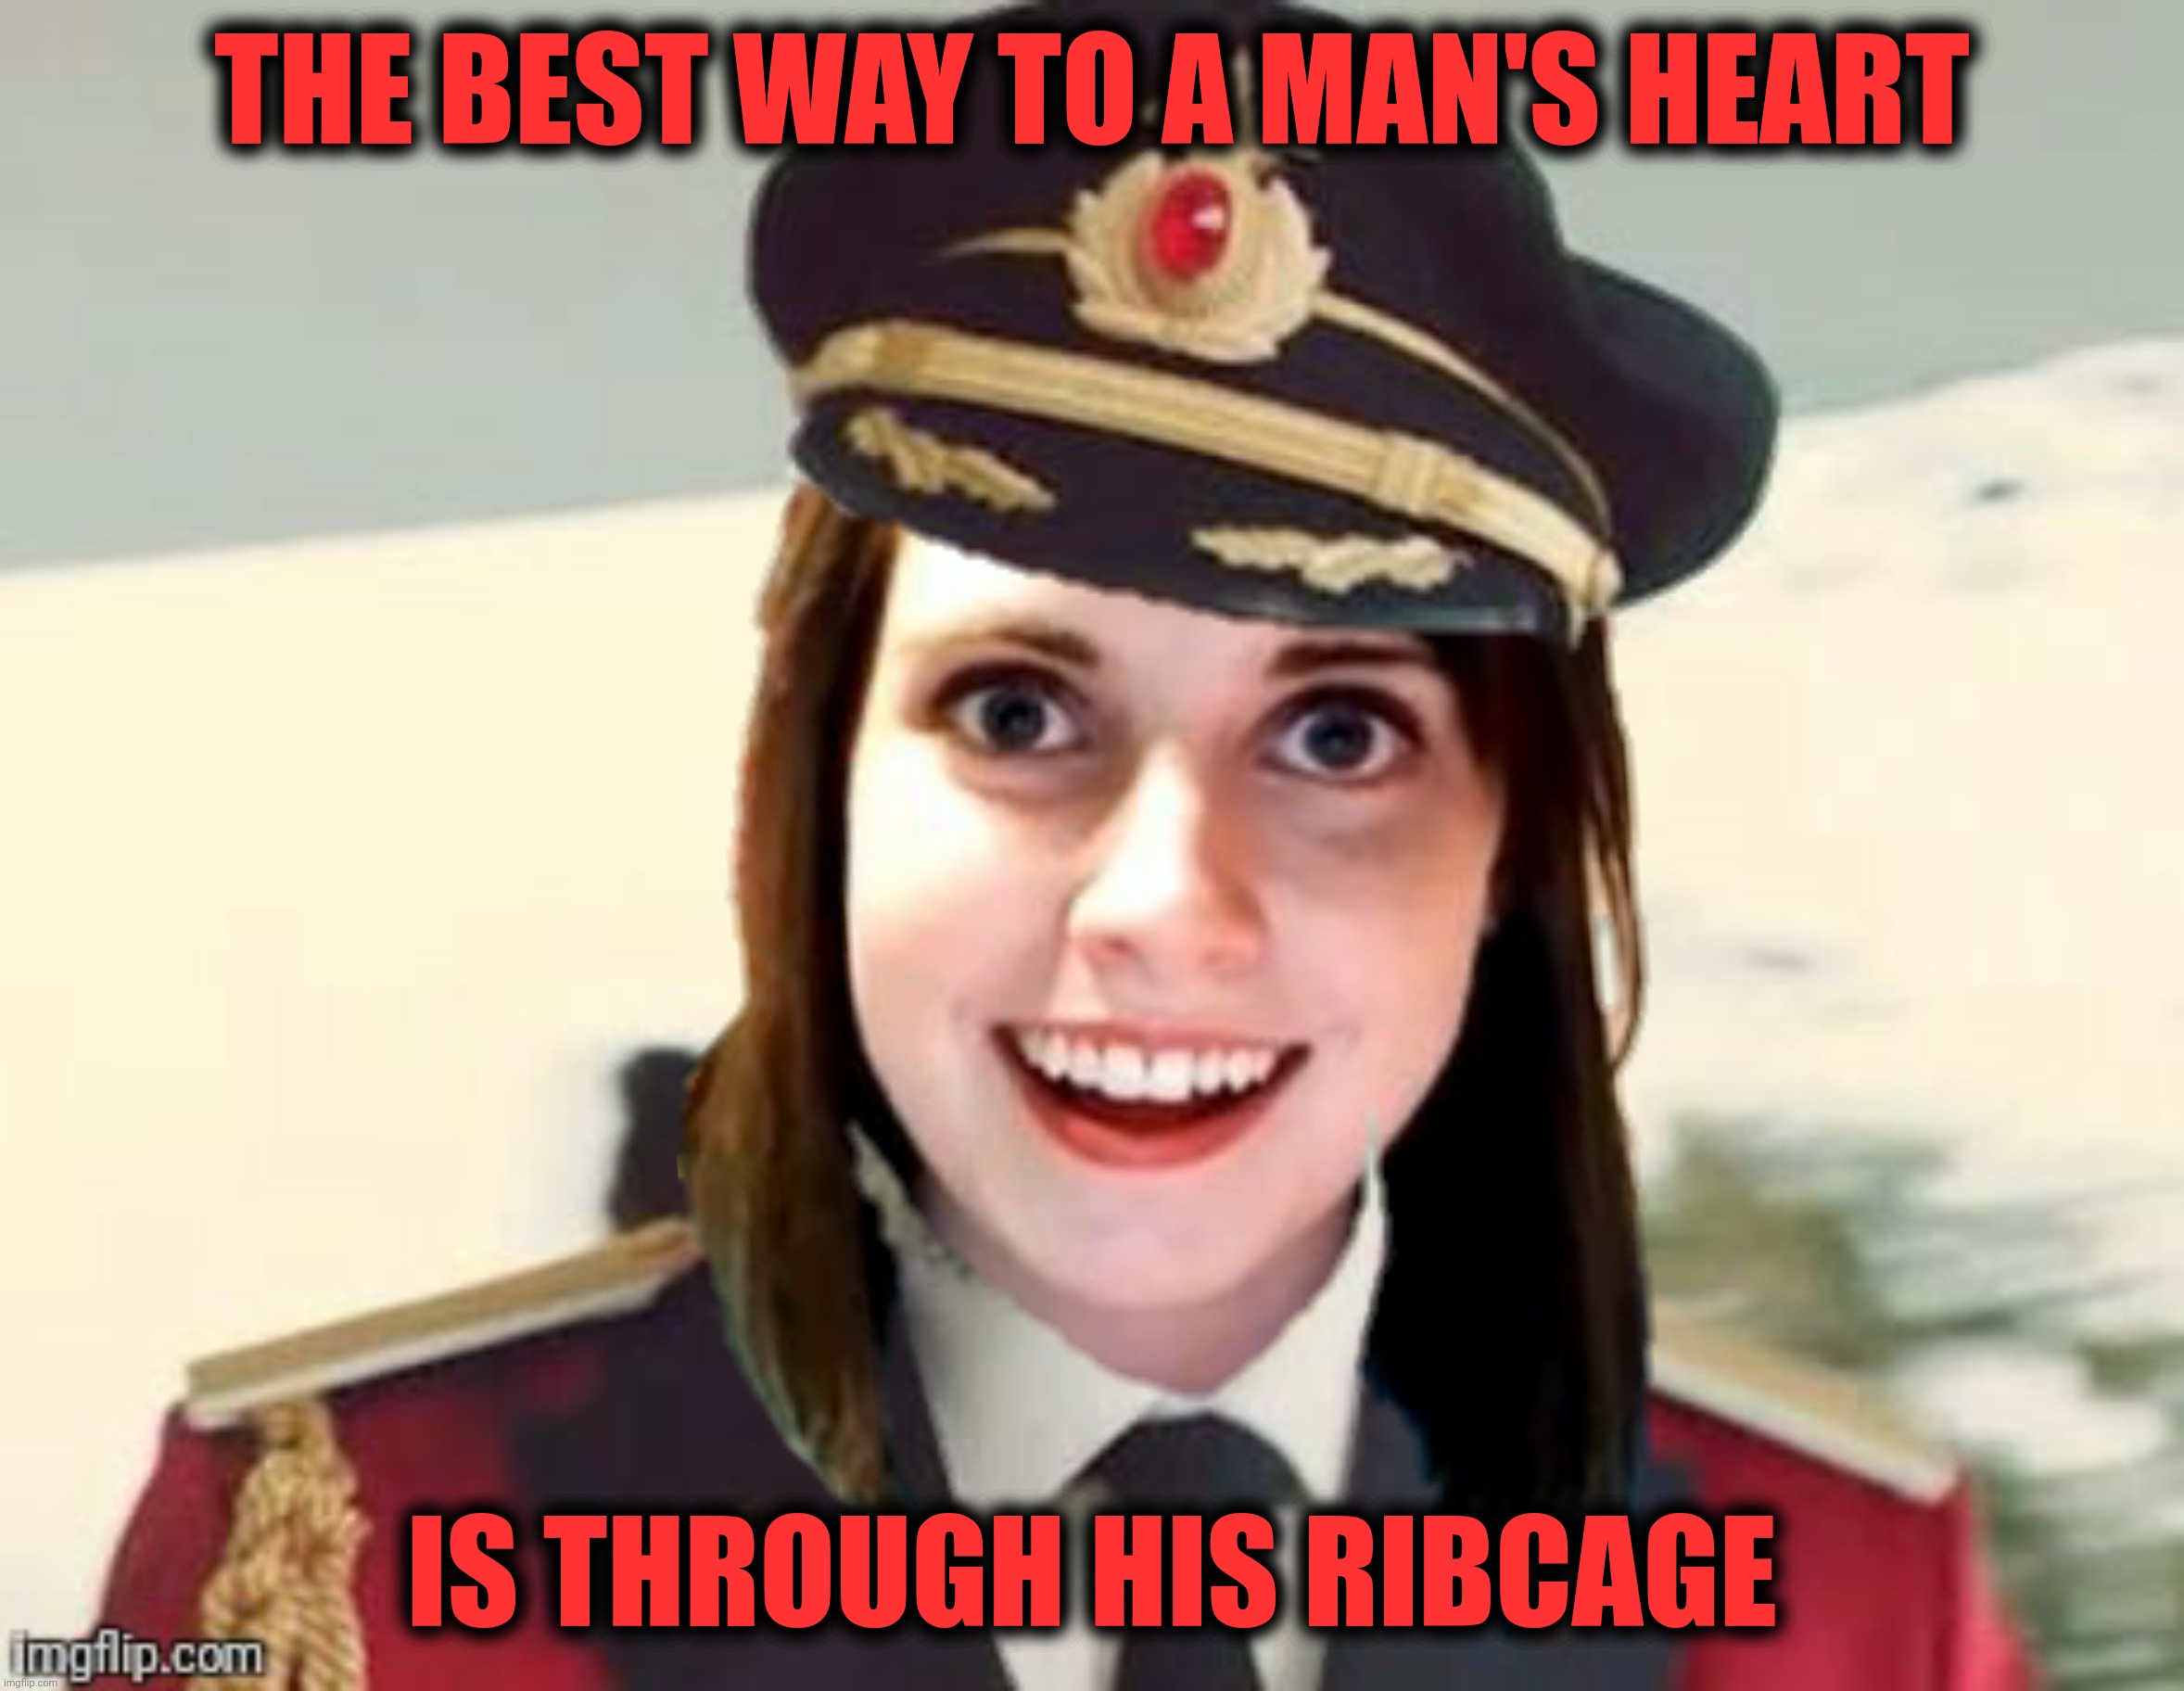 THE BEST WAY TO A MAN'S HEART IS THROUGH HIS RIBCAGE | made w/ Imgflip meme maker